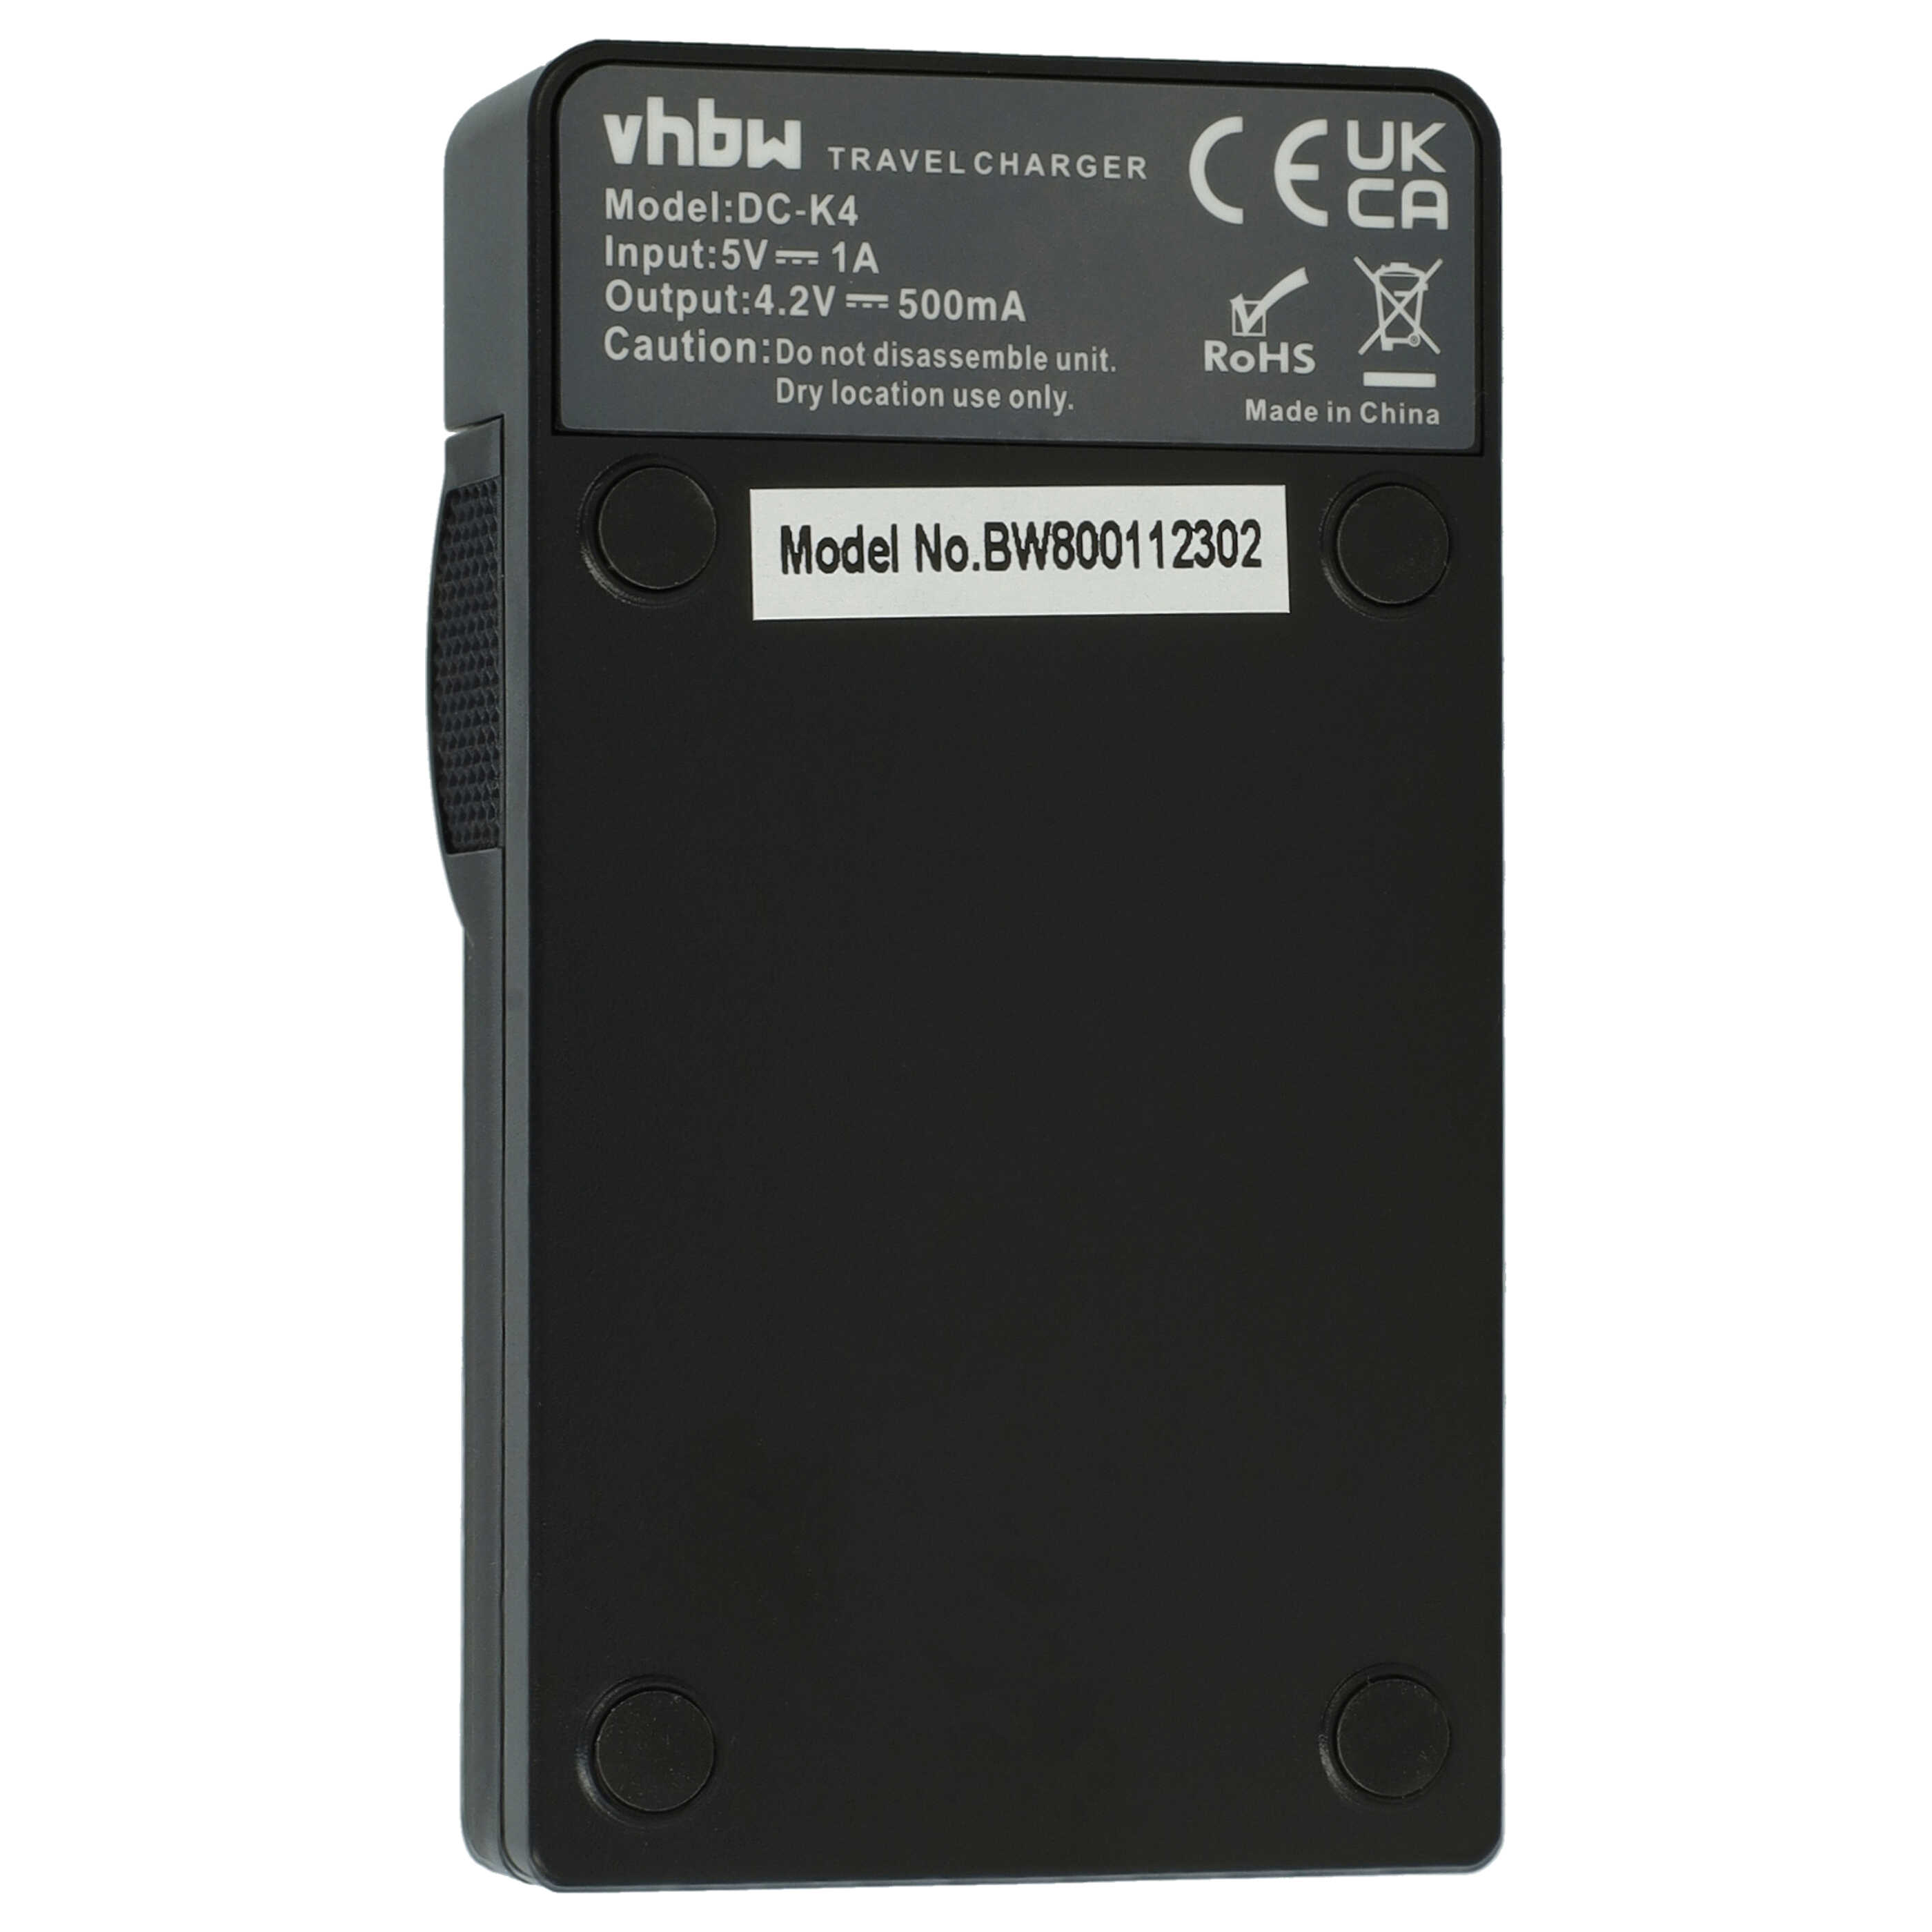 Battery Charger suitable for Coolpix P1 Camera etc. - 0.5 A, 4.2 V